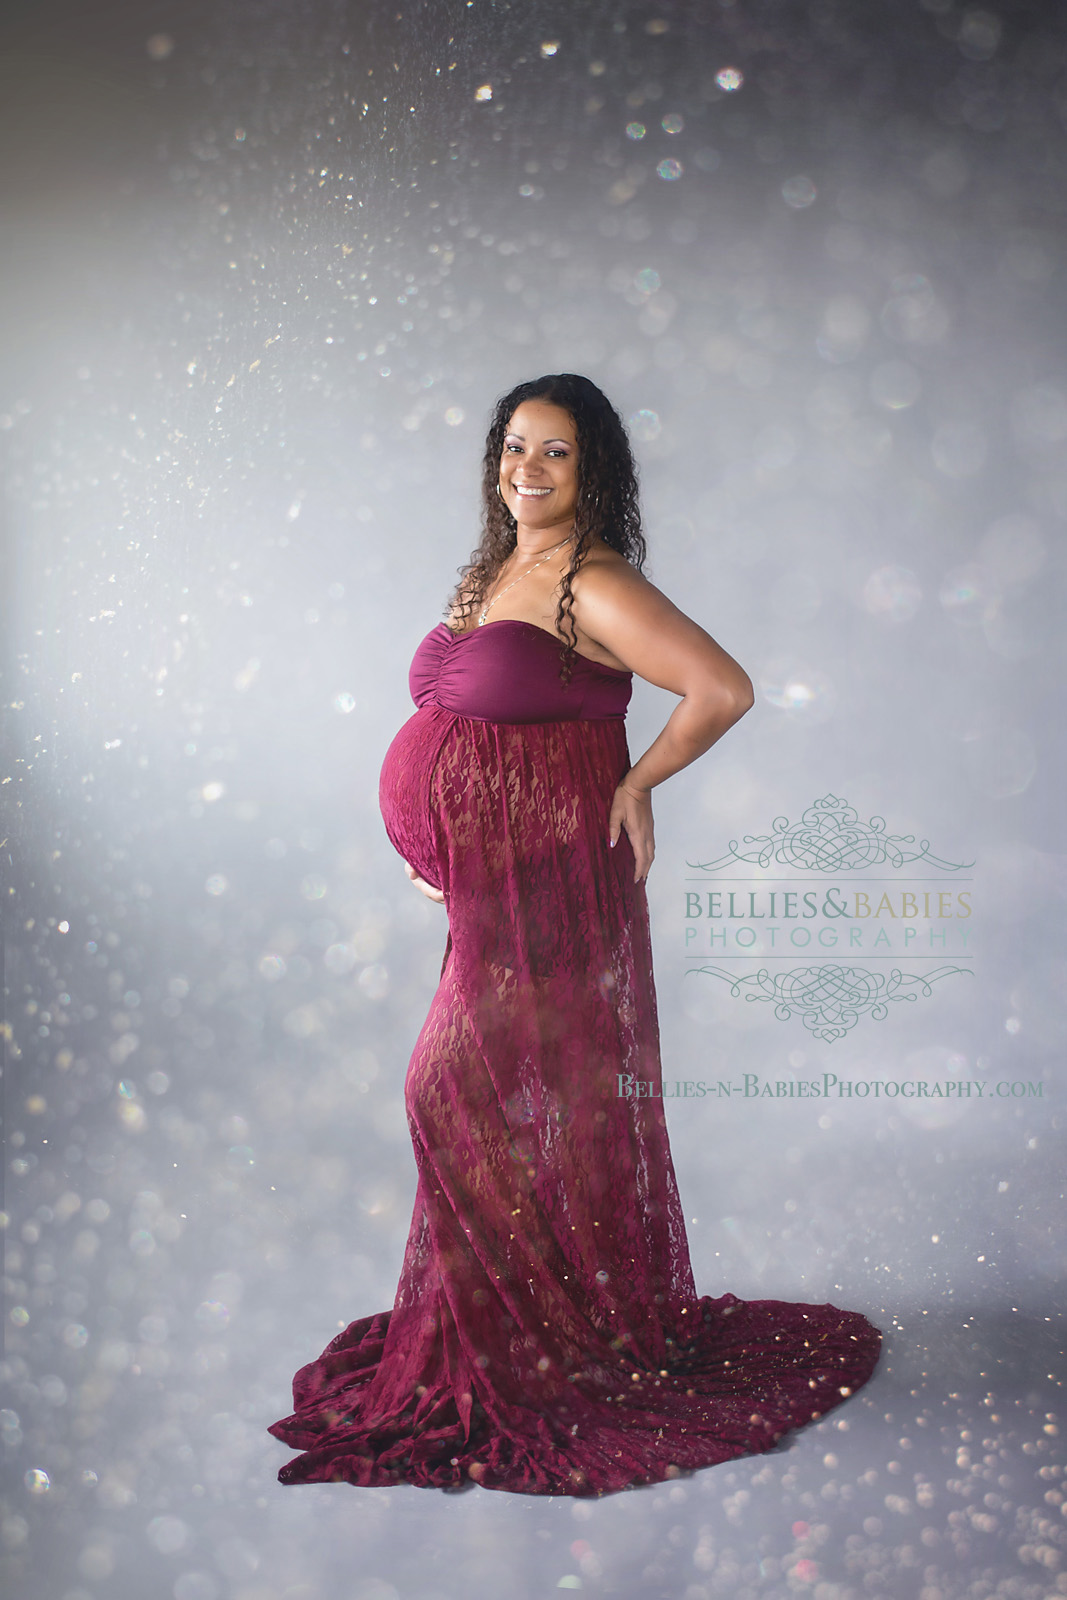 Bellies & Babies Photography